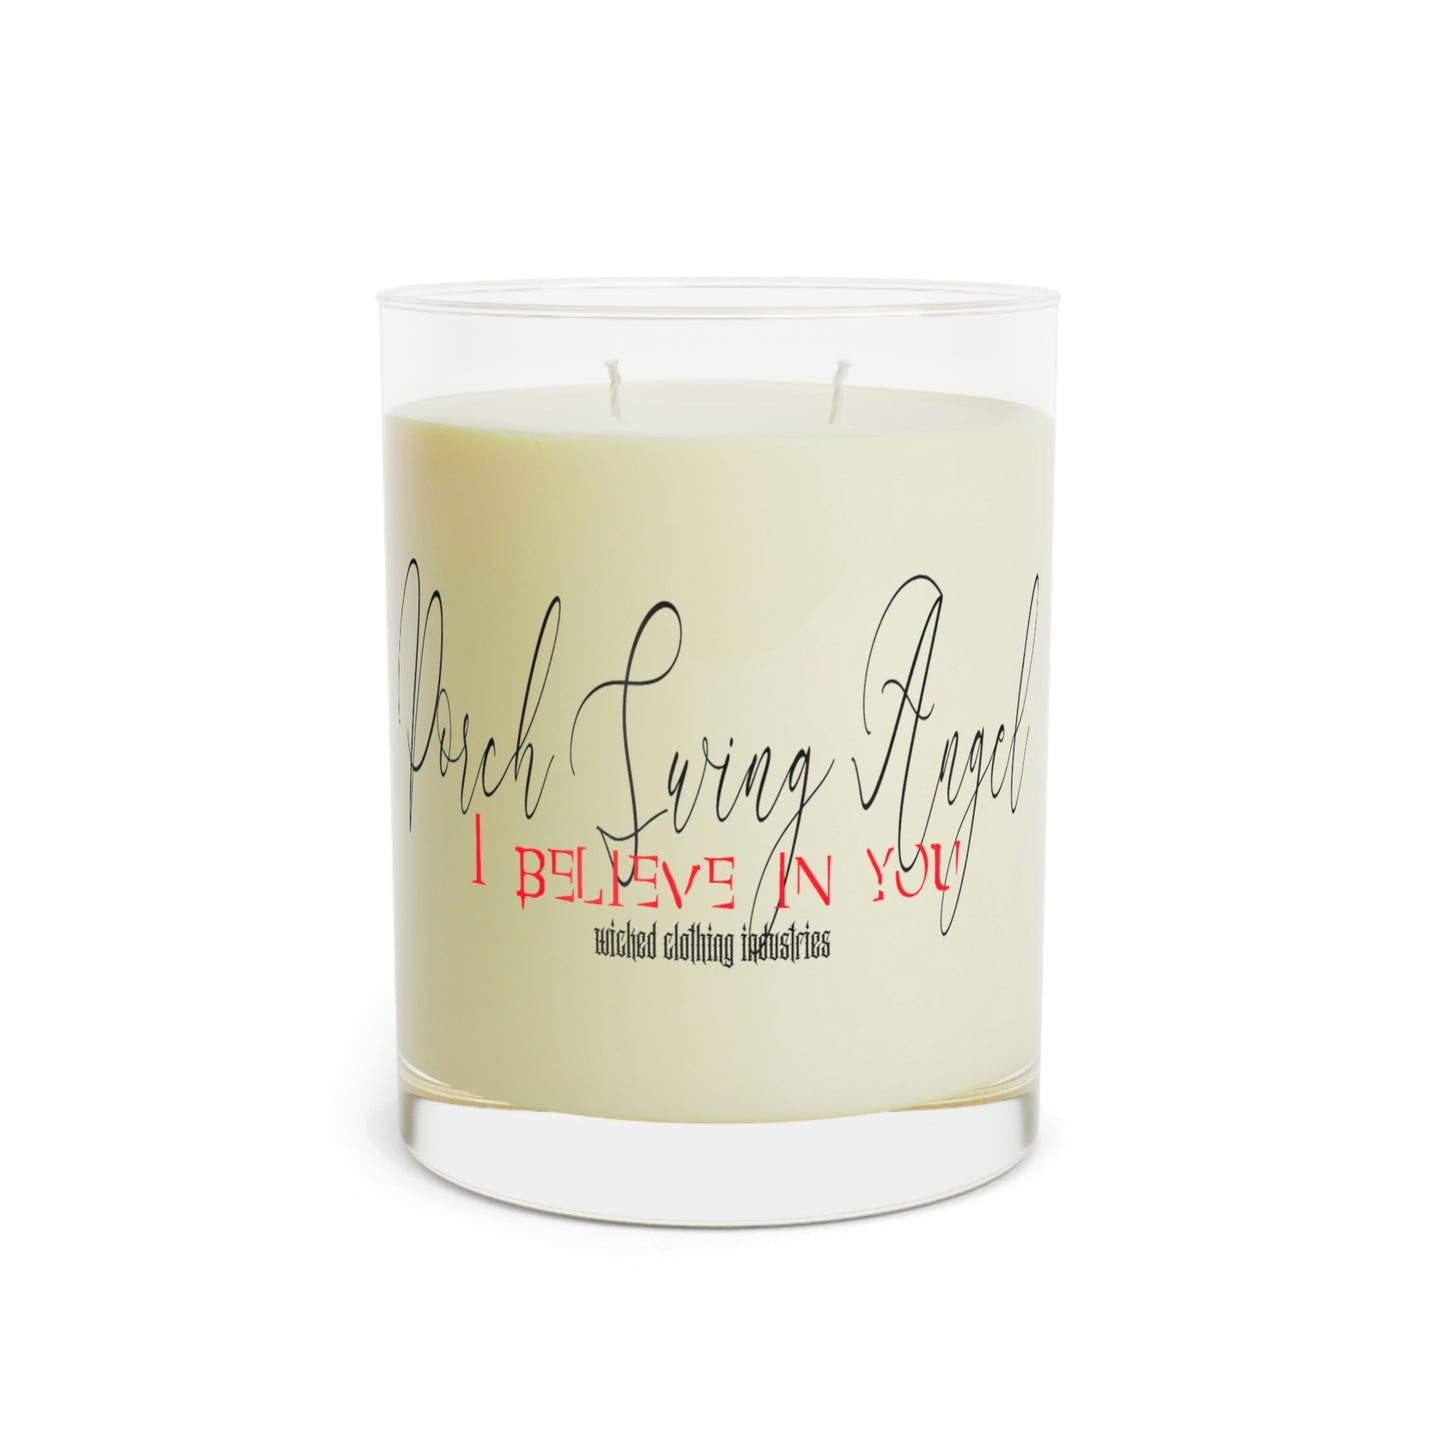 Porch Swing Angel 2 On Glass /Scented Candle, 11oz